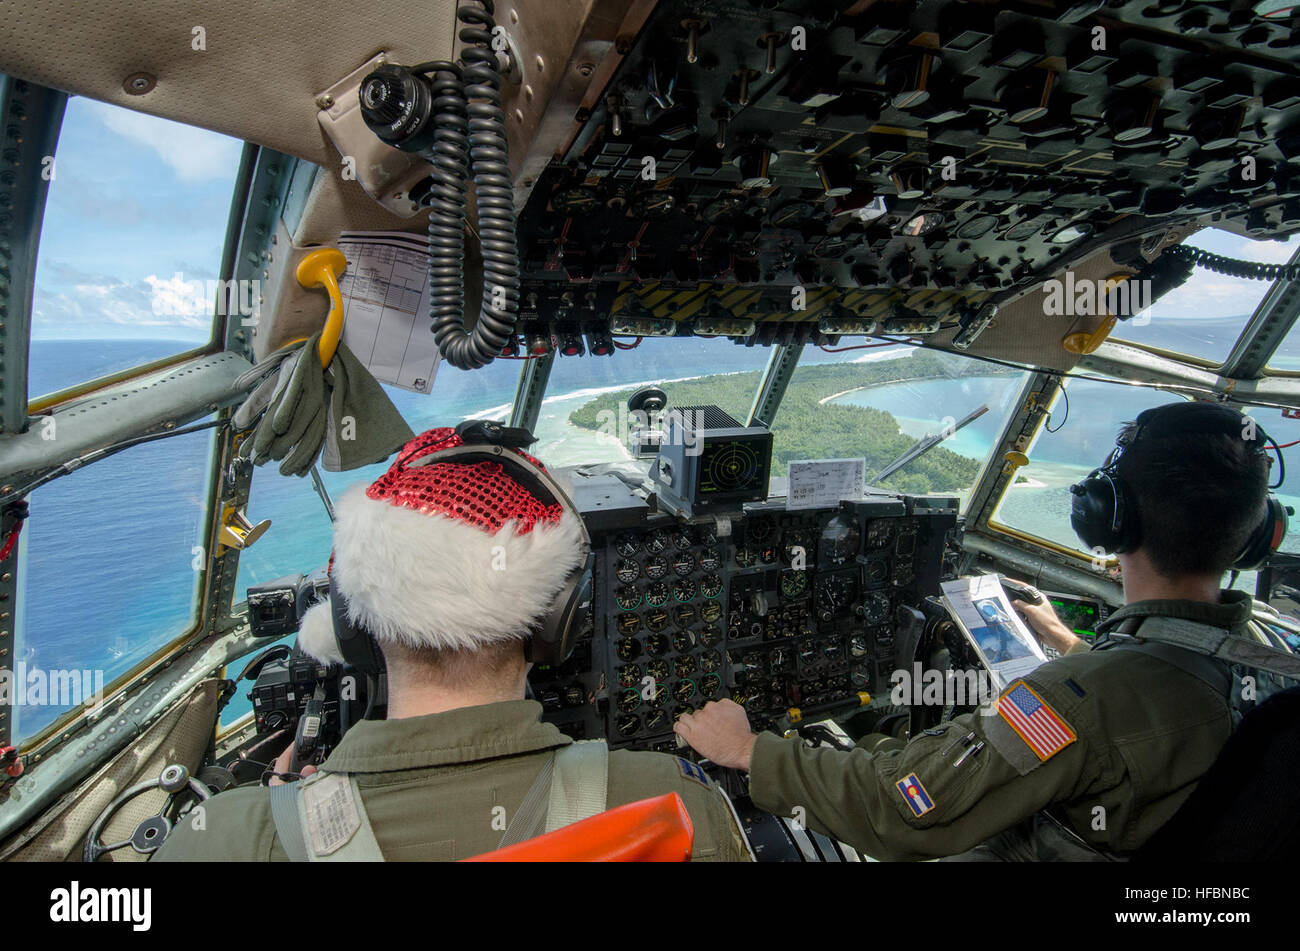 161211-N-YM720-116  FEDERATED STATES OF MICRONESIA (Dec. 12, 2016) – Air Force Capt. Jody Robertson and First Lt. Chad Moore, attached to 36th Airlift Squadron, Yokota Air Base, Japan, fly a C-130H Hercules over Ifalik, a small Micronesian island, during Operation Christmas Drop Dec. 11.  Operation Christmas Drop is an international humanitarian operation that provides critical supplies to 56 islands through the Commonwealth of the Northern Marianas, Federated States of Micronesia and Republic of Palau, impacting about 20,000 people. (U.S. Navy photo by Petty Officer 2nd Class Allen Michael Mc Stock Photo